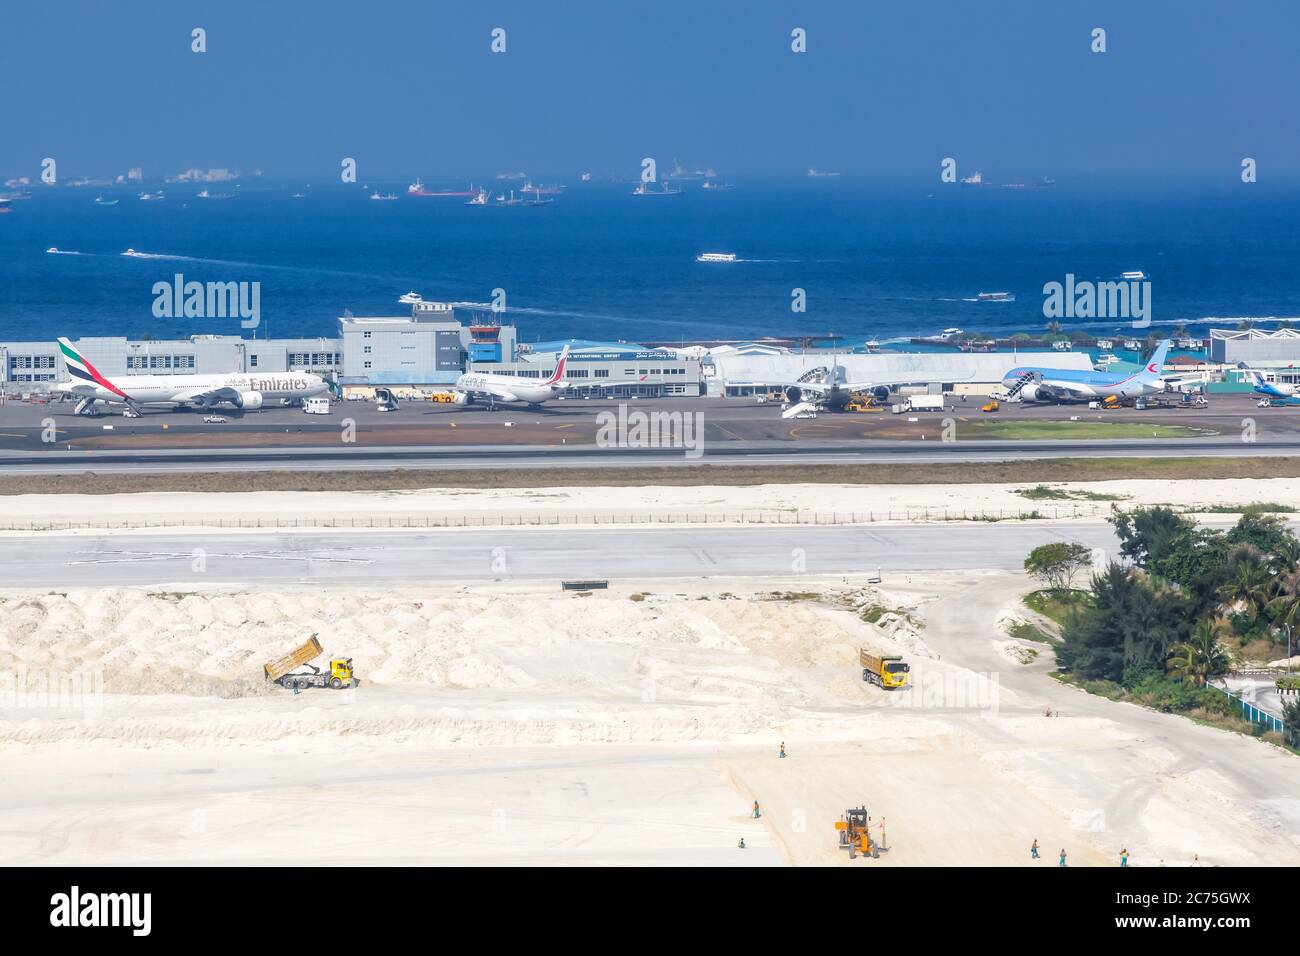 Male, Maldives - February 20, 2018: Terminal aerial view of Male airport (MLE) in the Maldives. Stock Photo